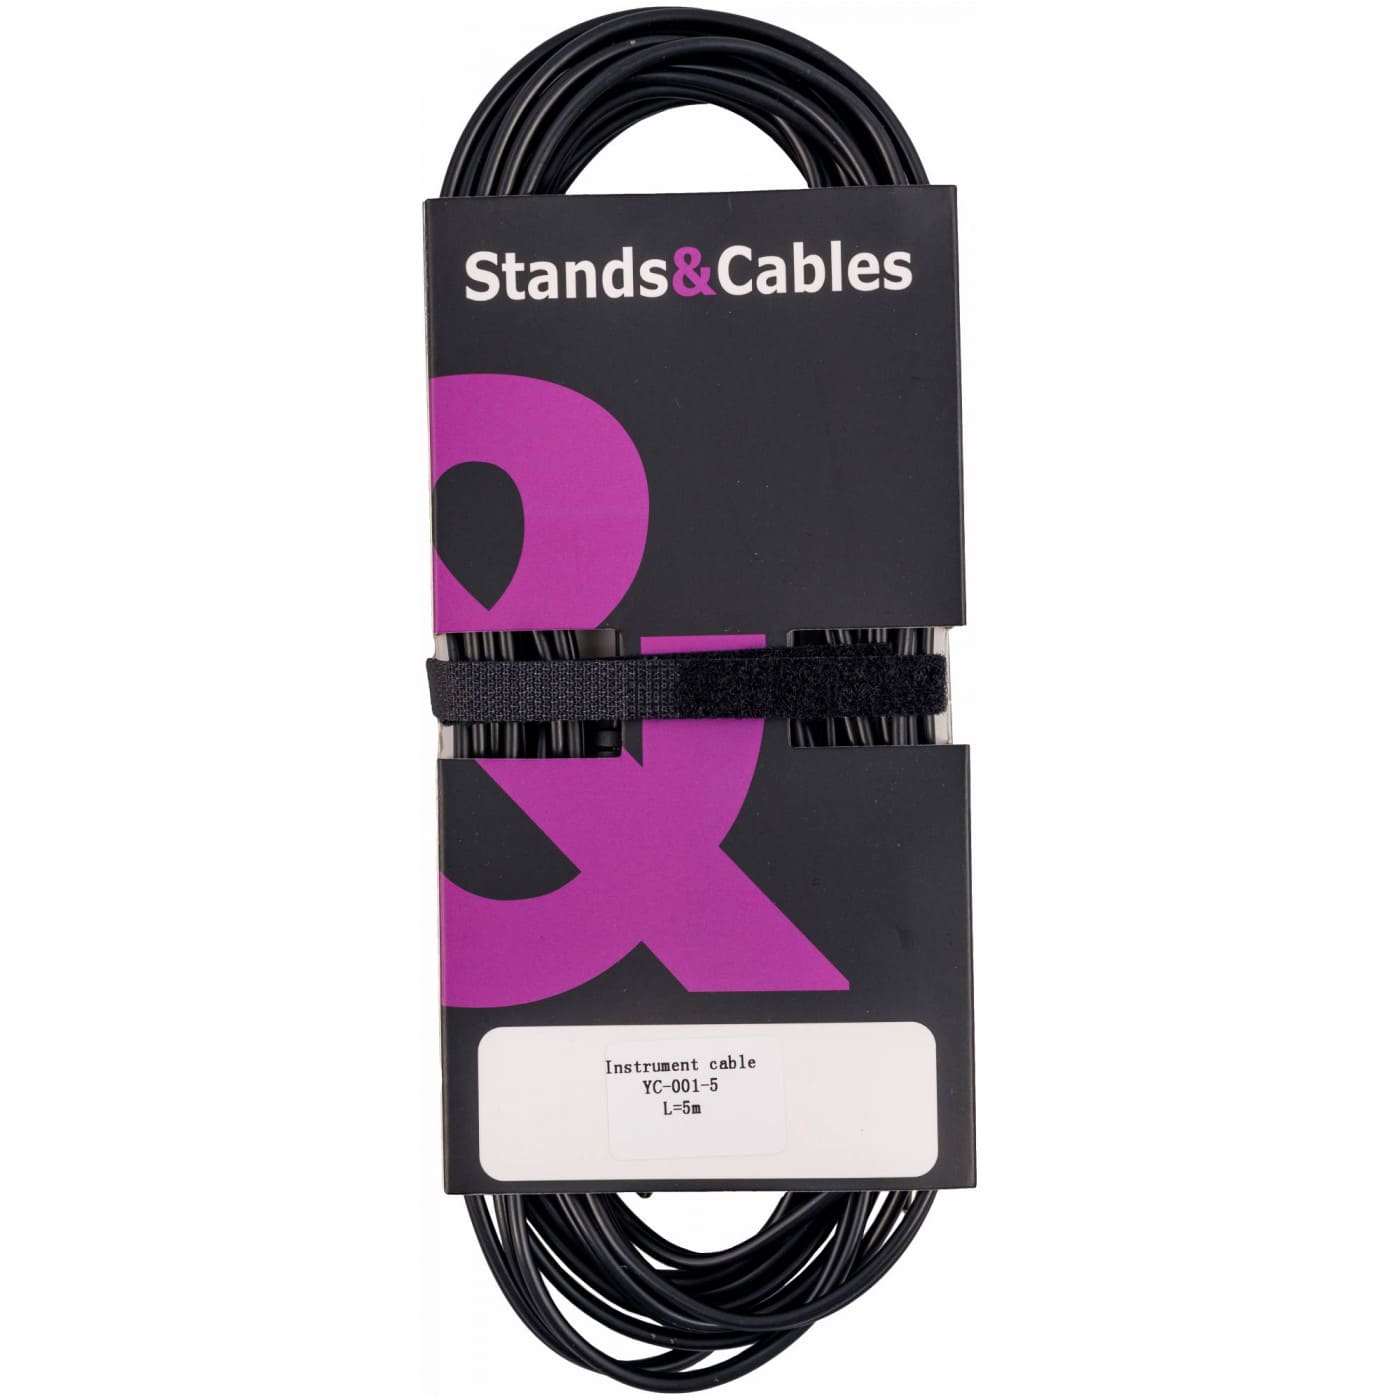 STANDS & CABLES YC-001 5 - Аудио - кабель, 5 м